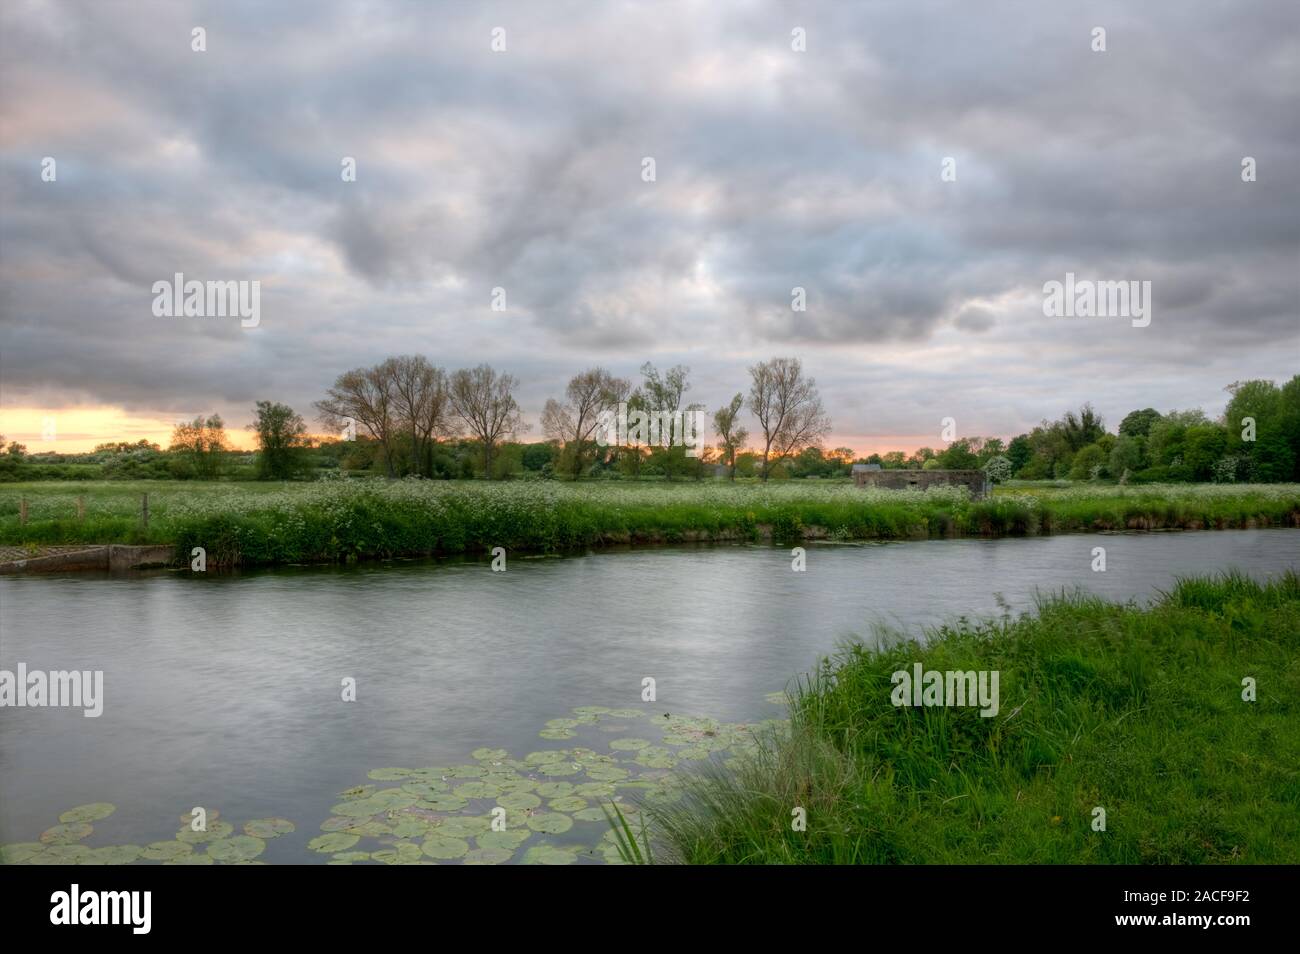 storm clouds gather across the River Stour looking towards the old WWII pillbox. Stock Photo